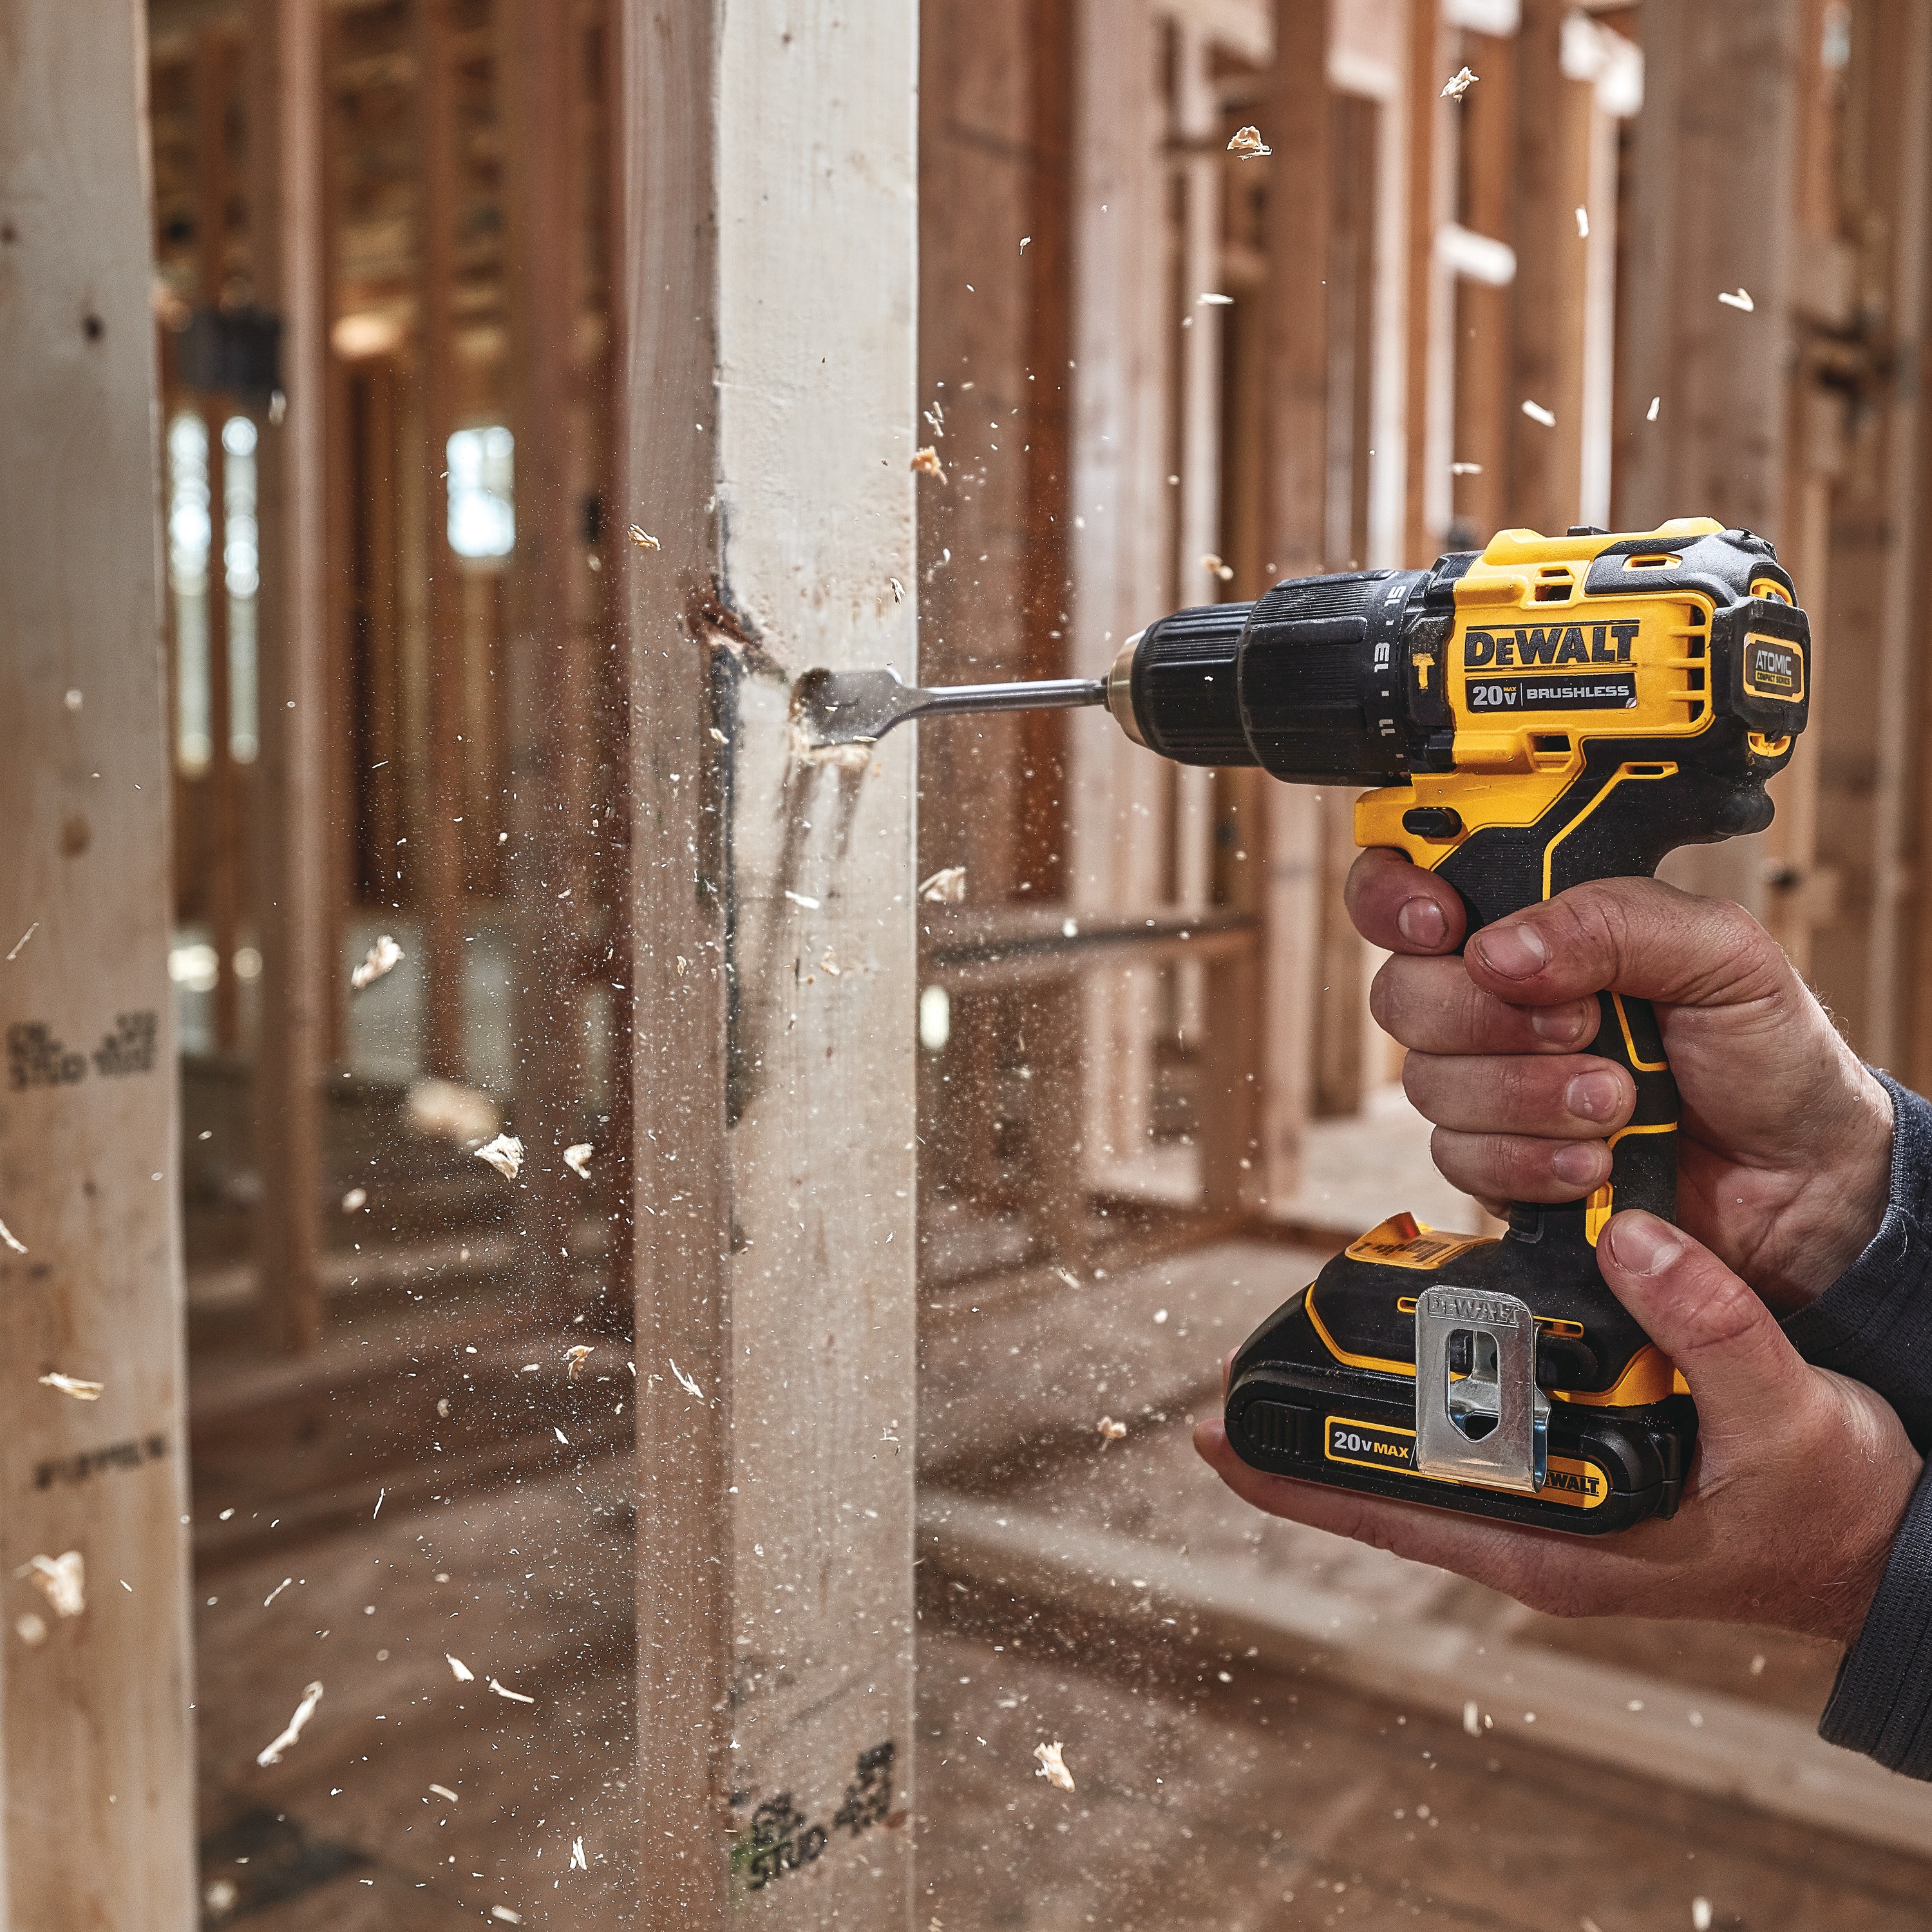 ATOMIC Brushless Compact Cordless half inch Hammer drill driver drilling  wooden plank.